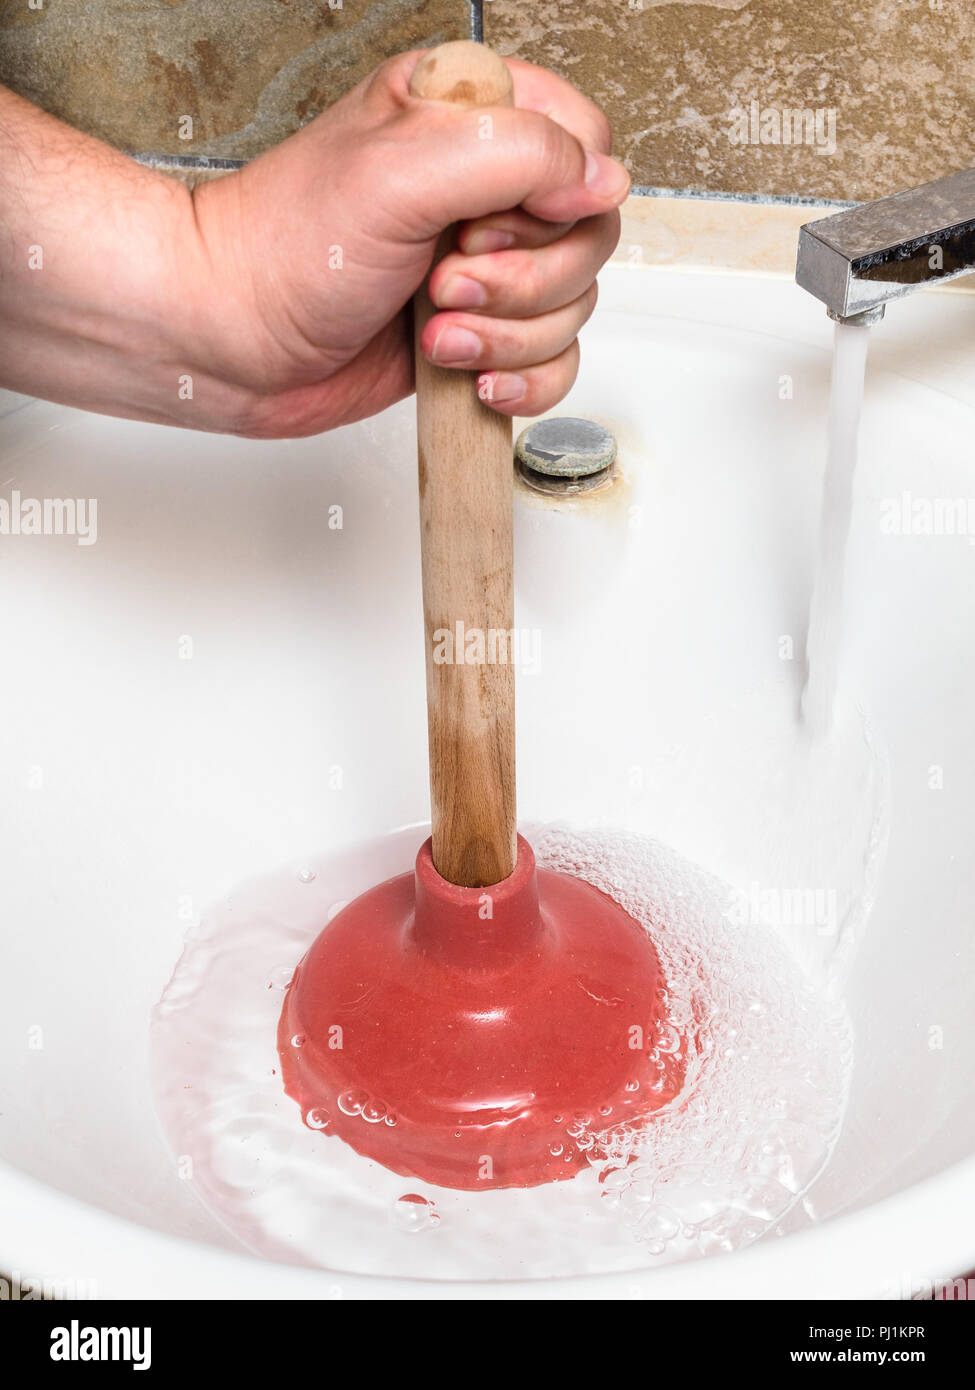 Plumber Clears Water Blockage In Sink Drain By Plunger Stock